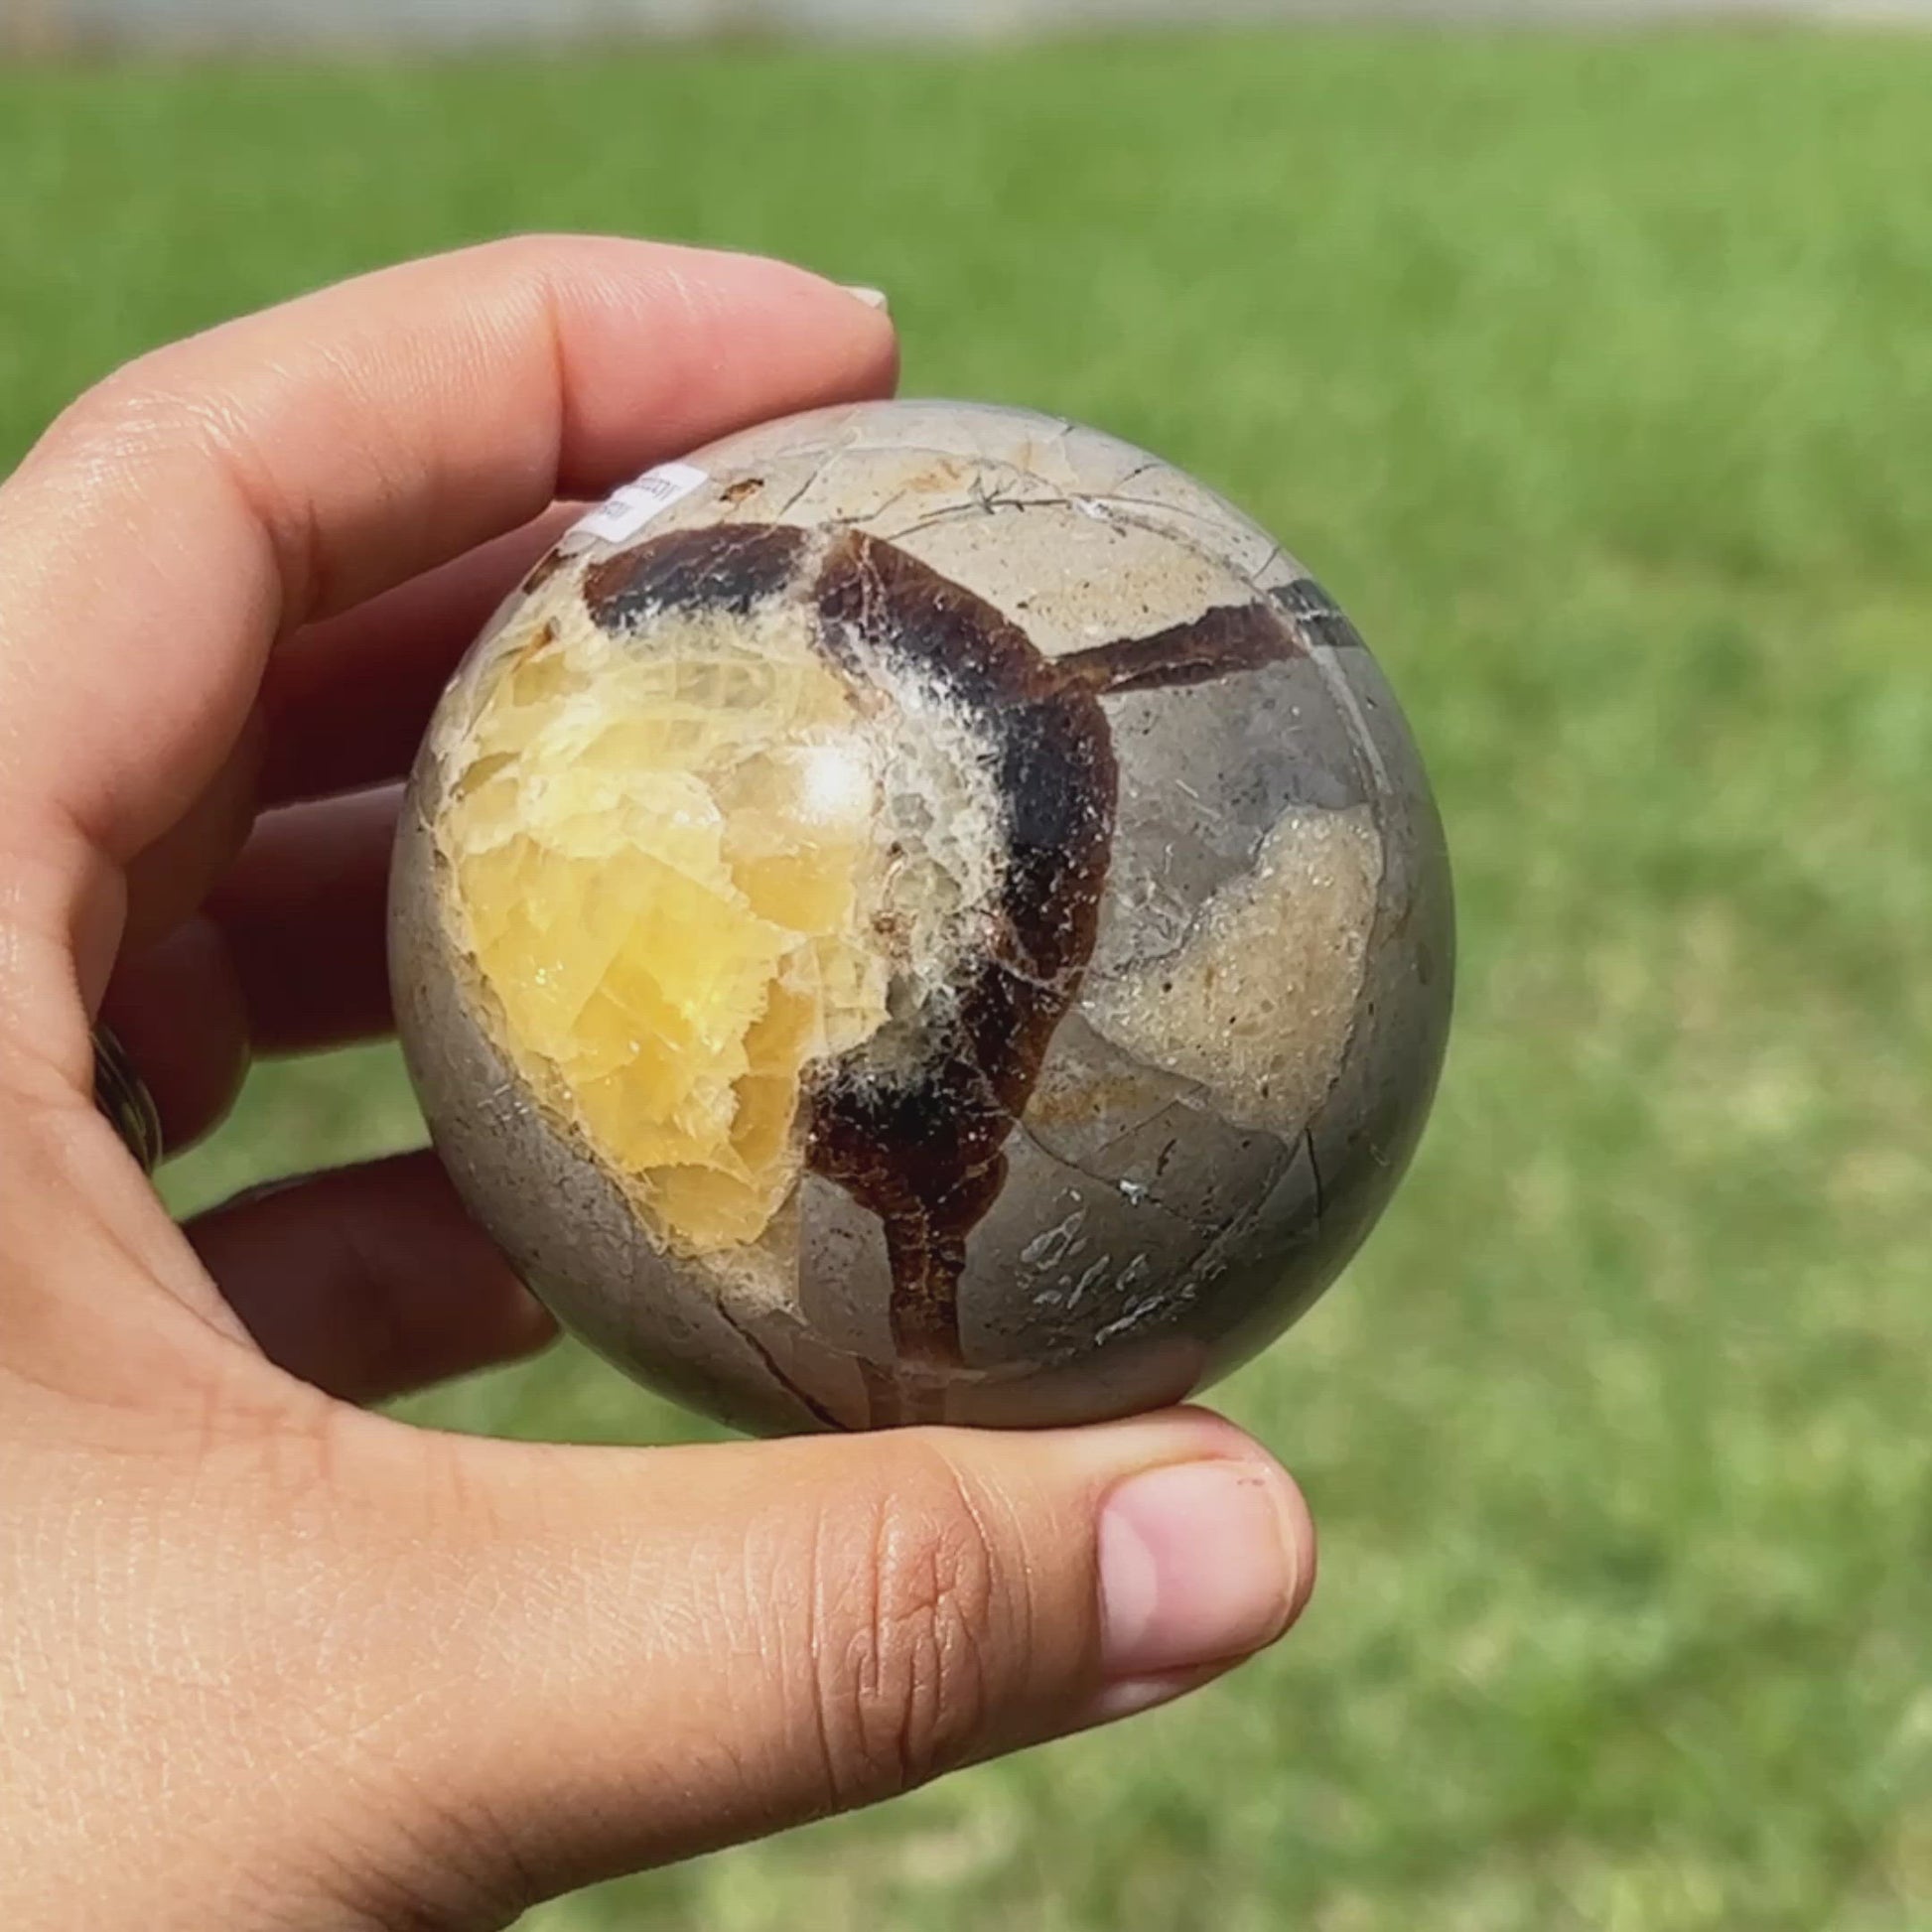 Shop for Madagascar Septarian Dragon Stone Sphere, Septarian Nodule Stone at Magic Crystals. UV Reactive Septarian Stone, Dragon Stone For the Root Chakra, Grounding Minerals. Septarian stone has a calming, nurturing energy, and can bring feelings of joy and spiritually uplifting. FREE SHIPPING AVAILABLE